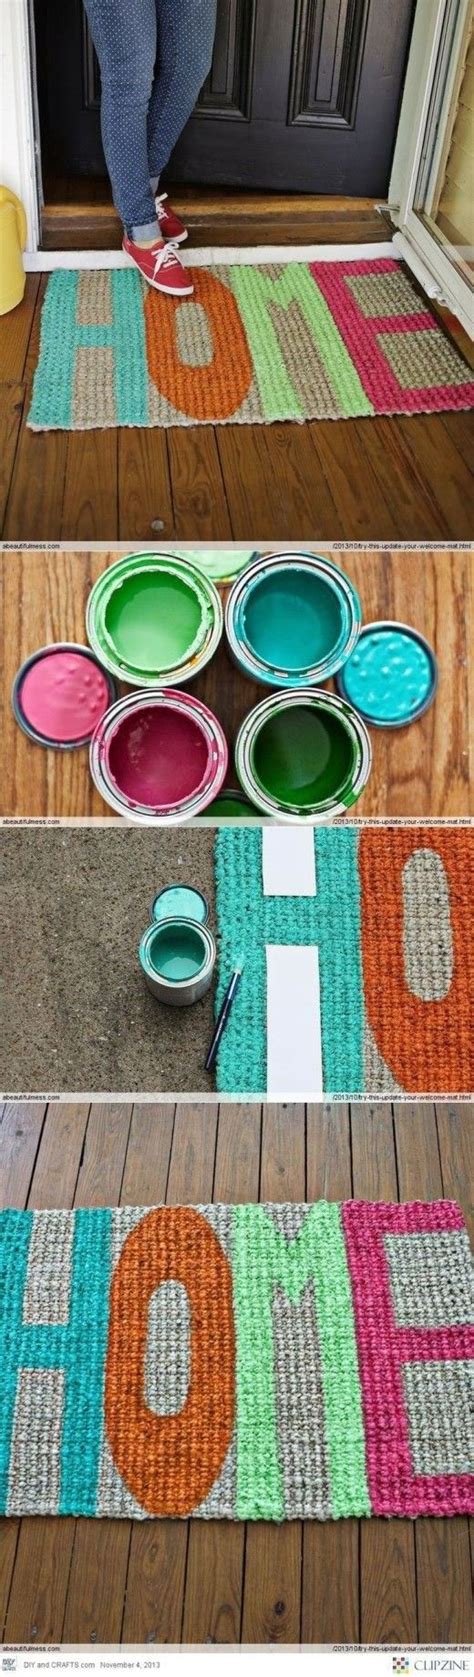 Try This Update Your Welcome Mat A Beautiful Mess Diy Home Decor